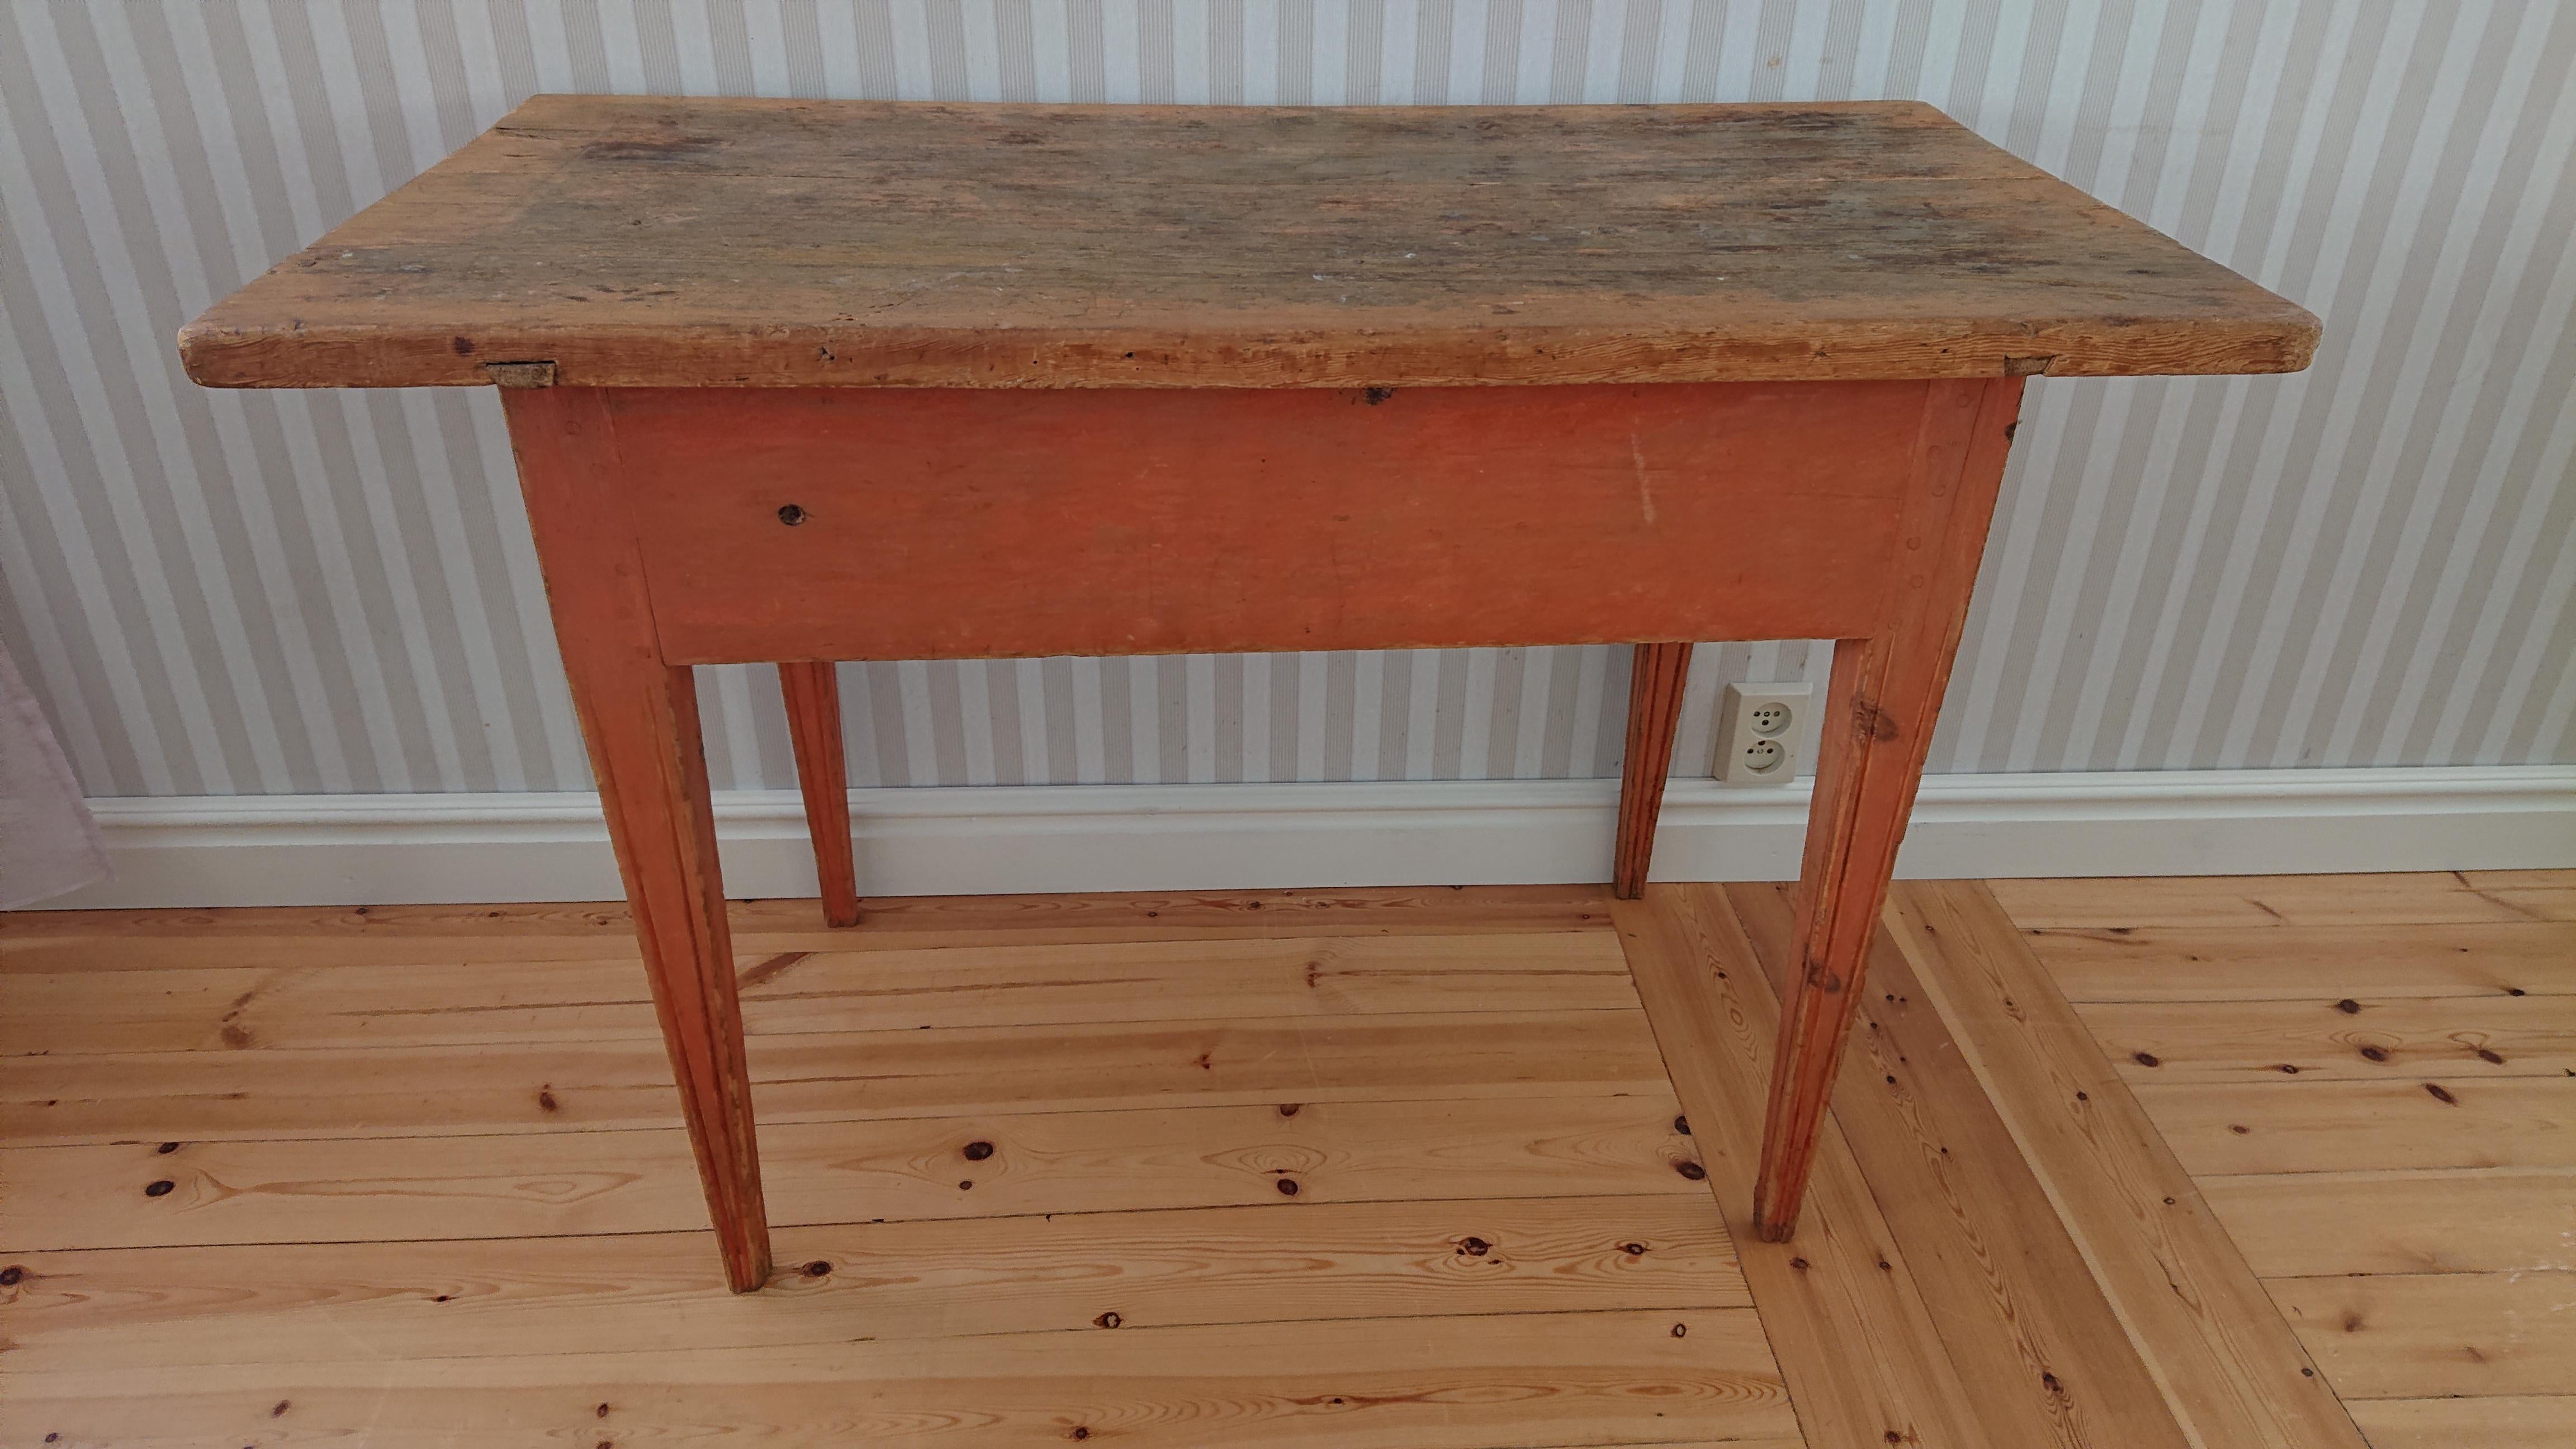 Early 19th Century Swedish  Antique Rustic Gustavian Provincial table from Boden Norrbotten, Northern Sweden.
Nice little neat table scraped by hand to its original paint.
Lovely colorful color.
The table is easy to place & looks very nice with